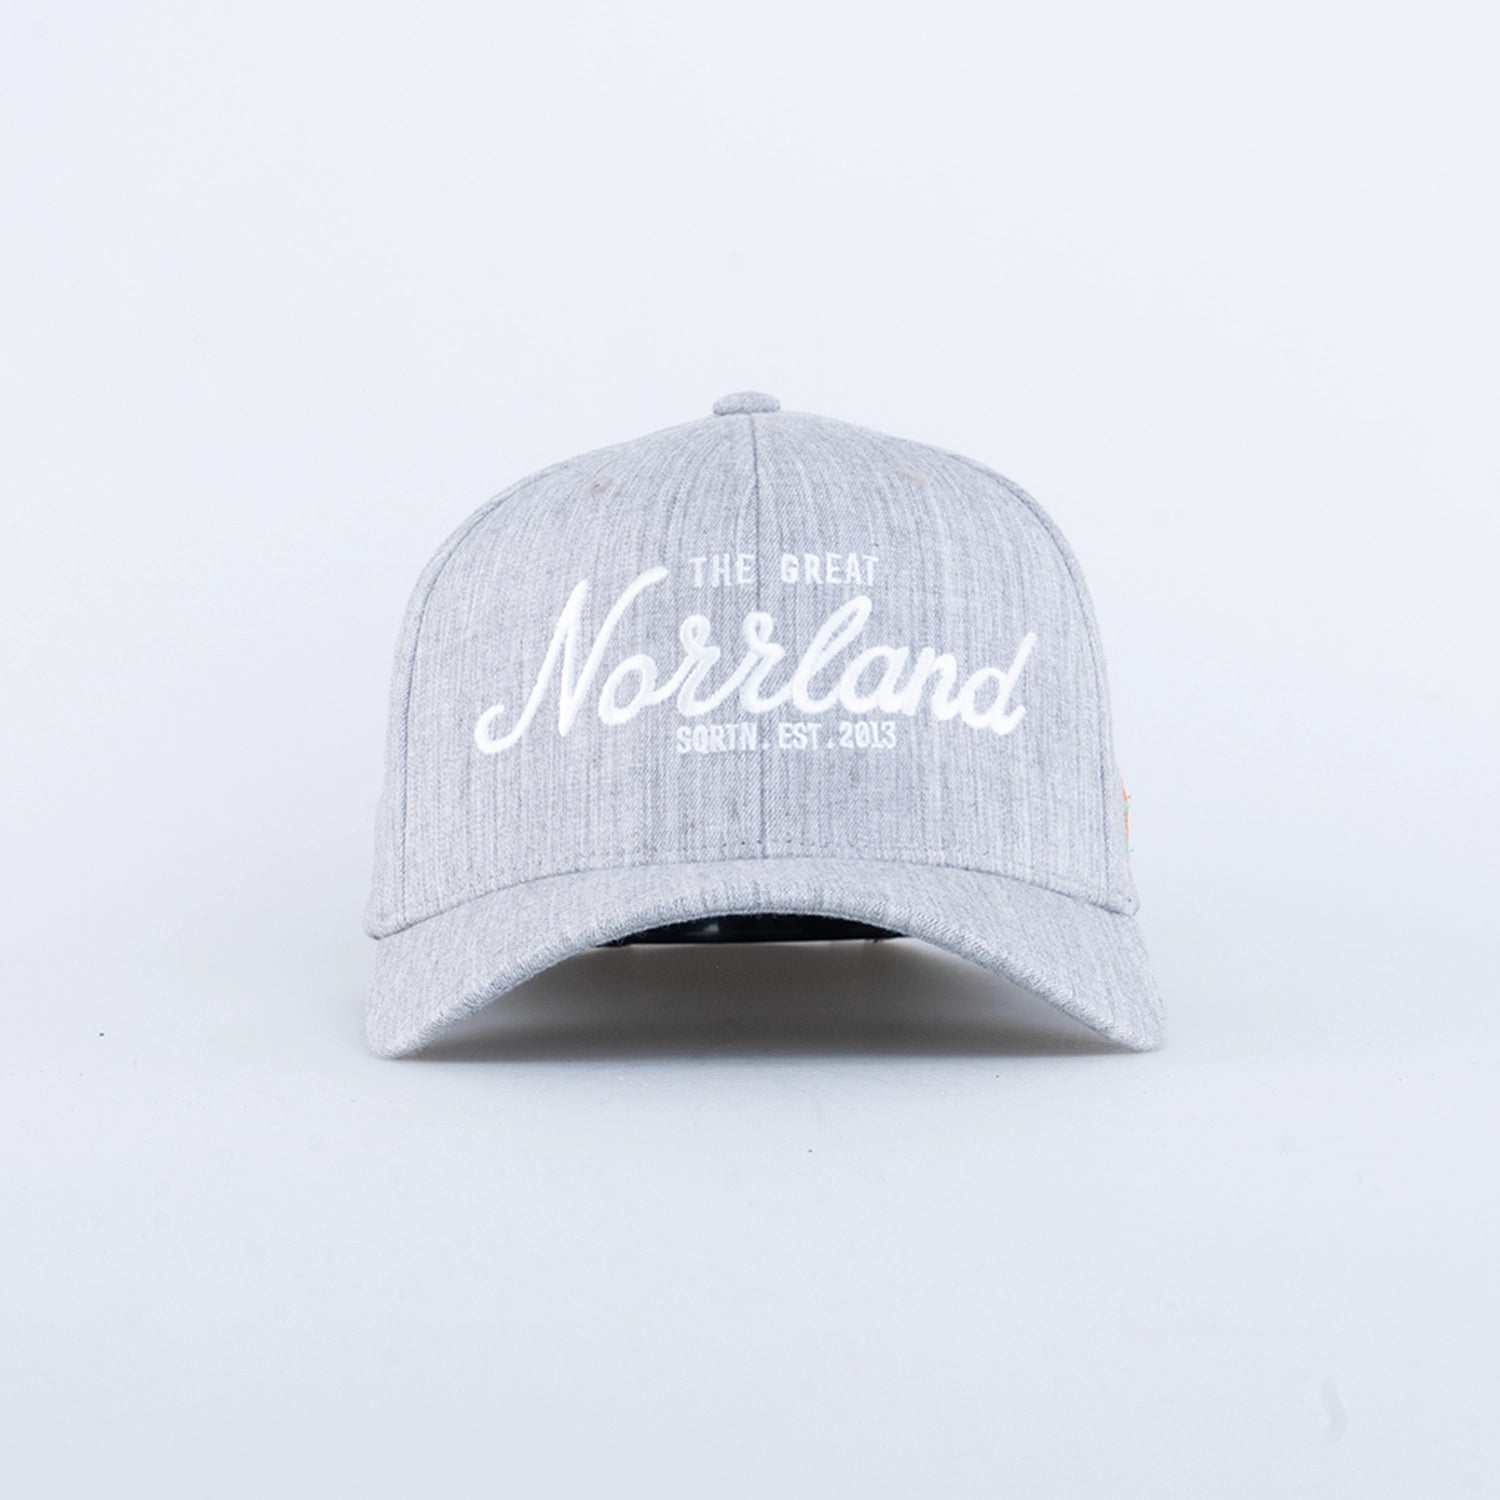 GREAT NORRLAND 120 KEPS - GREY